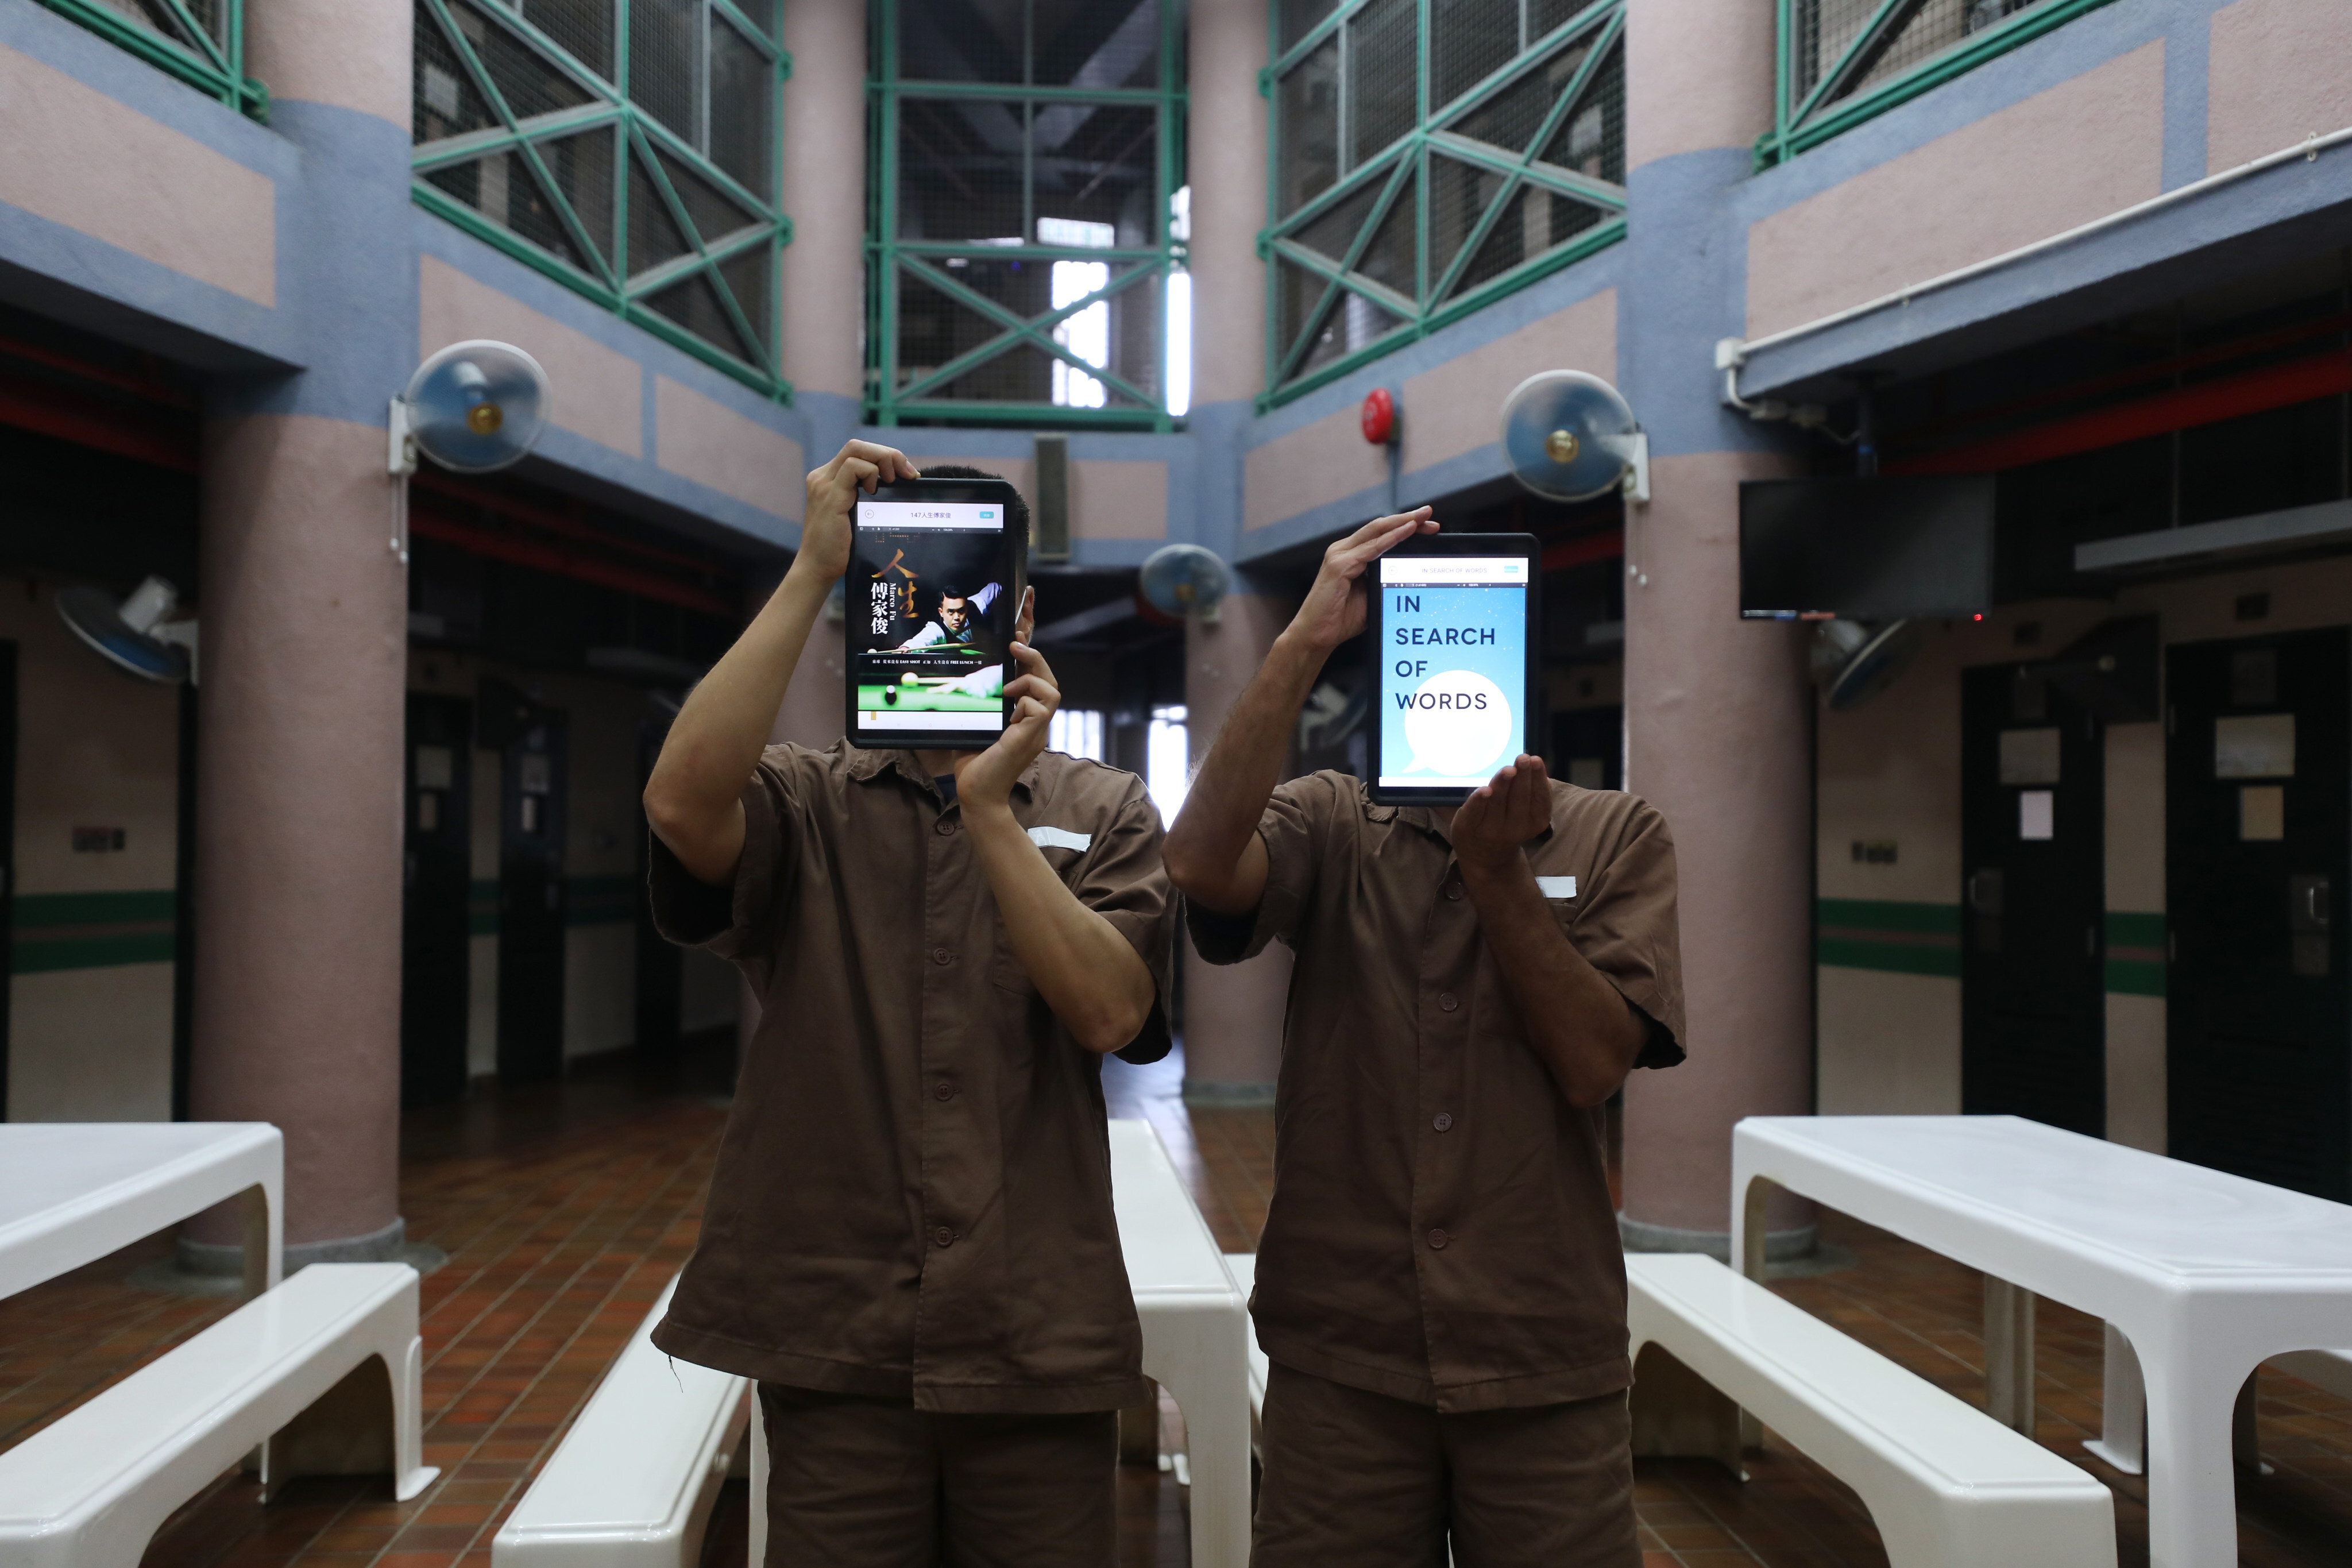 Inmates show off their iPads at Stanley Prison on June 5, 2020. The “smart prison” project allows inmates to learn skills they will need to succeed when they eventually return to the outside world. Photo: Xiaomei Chen